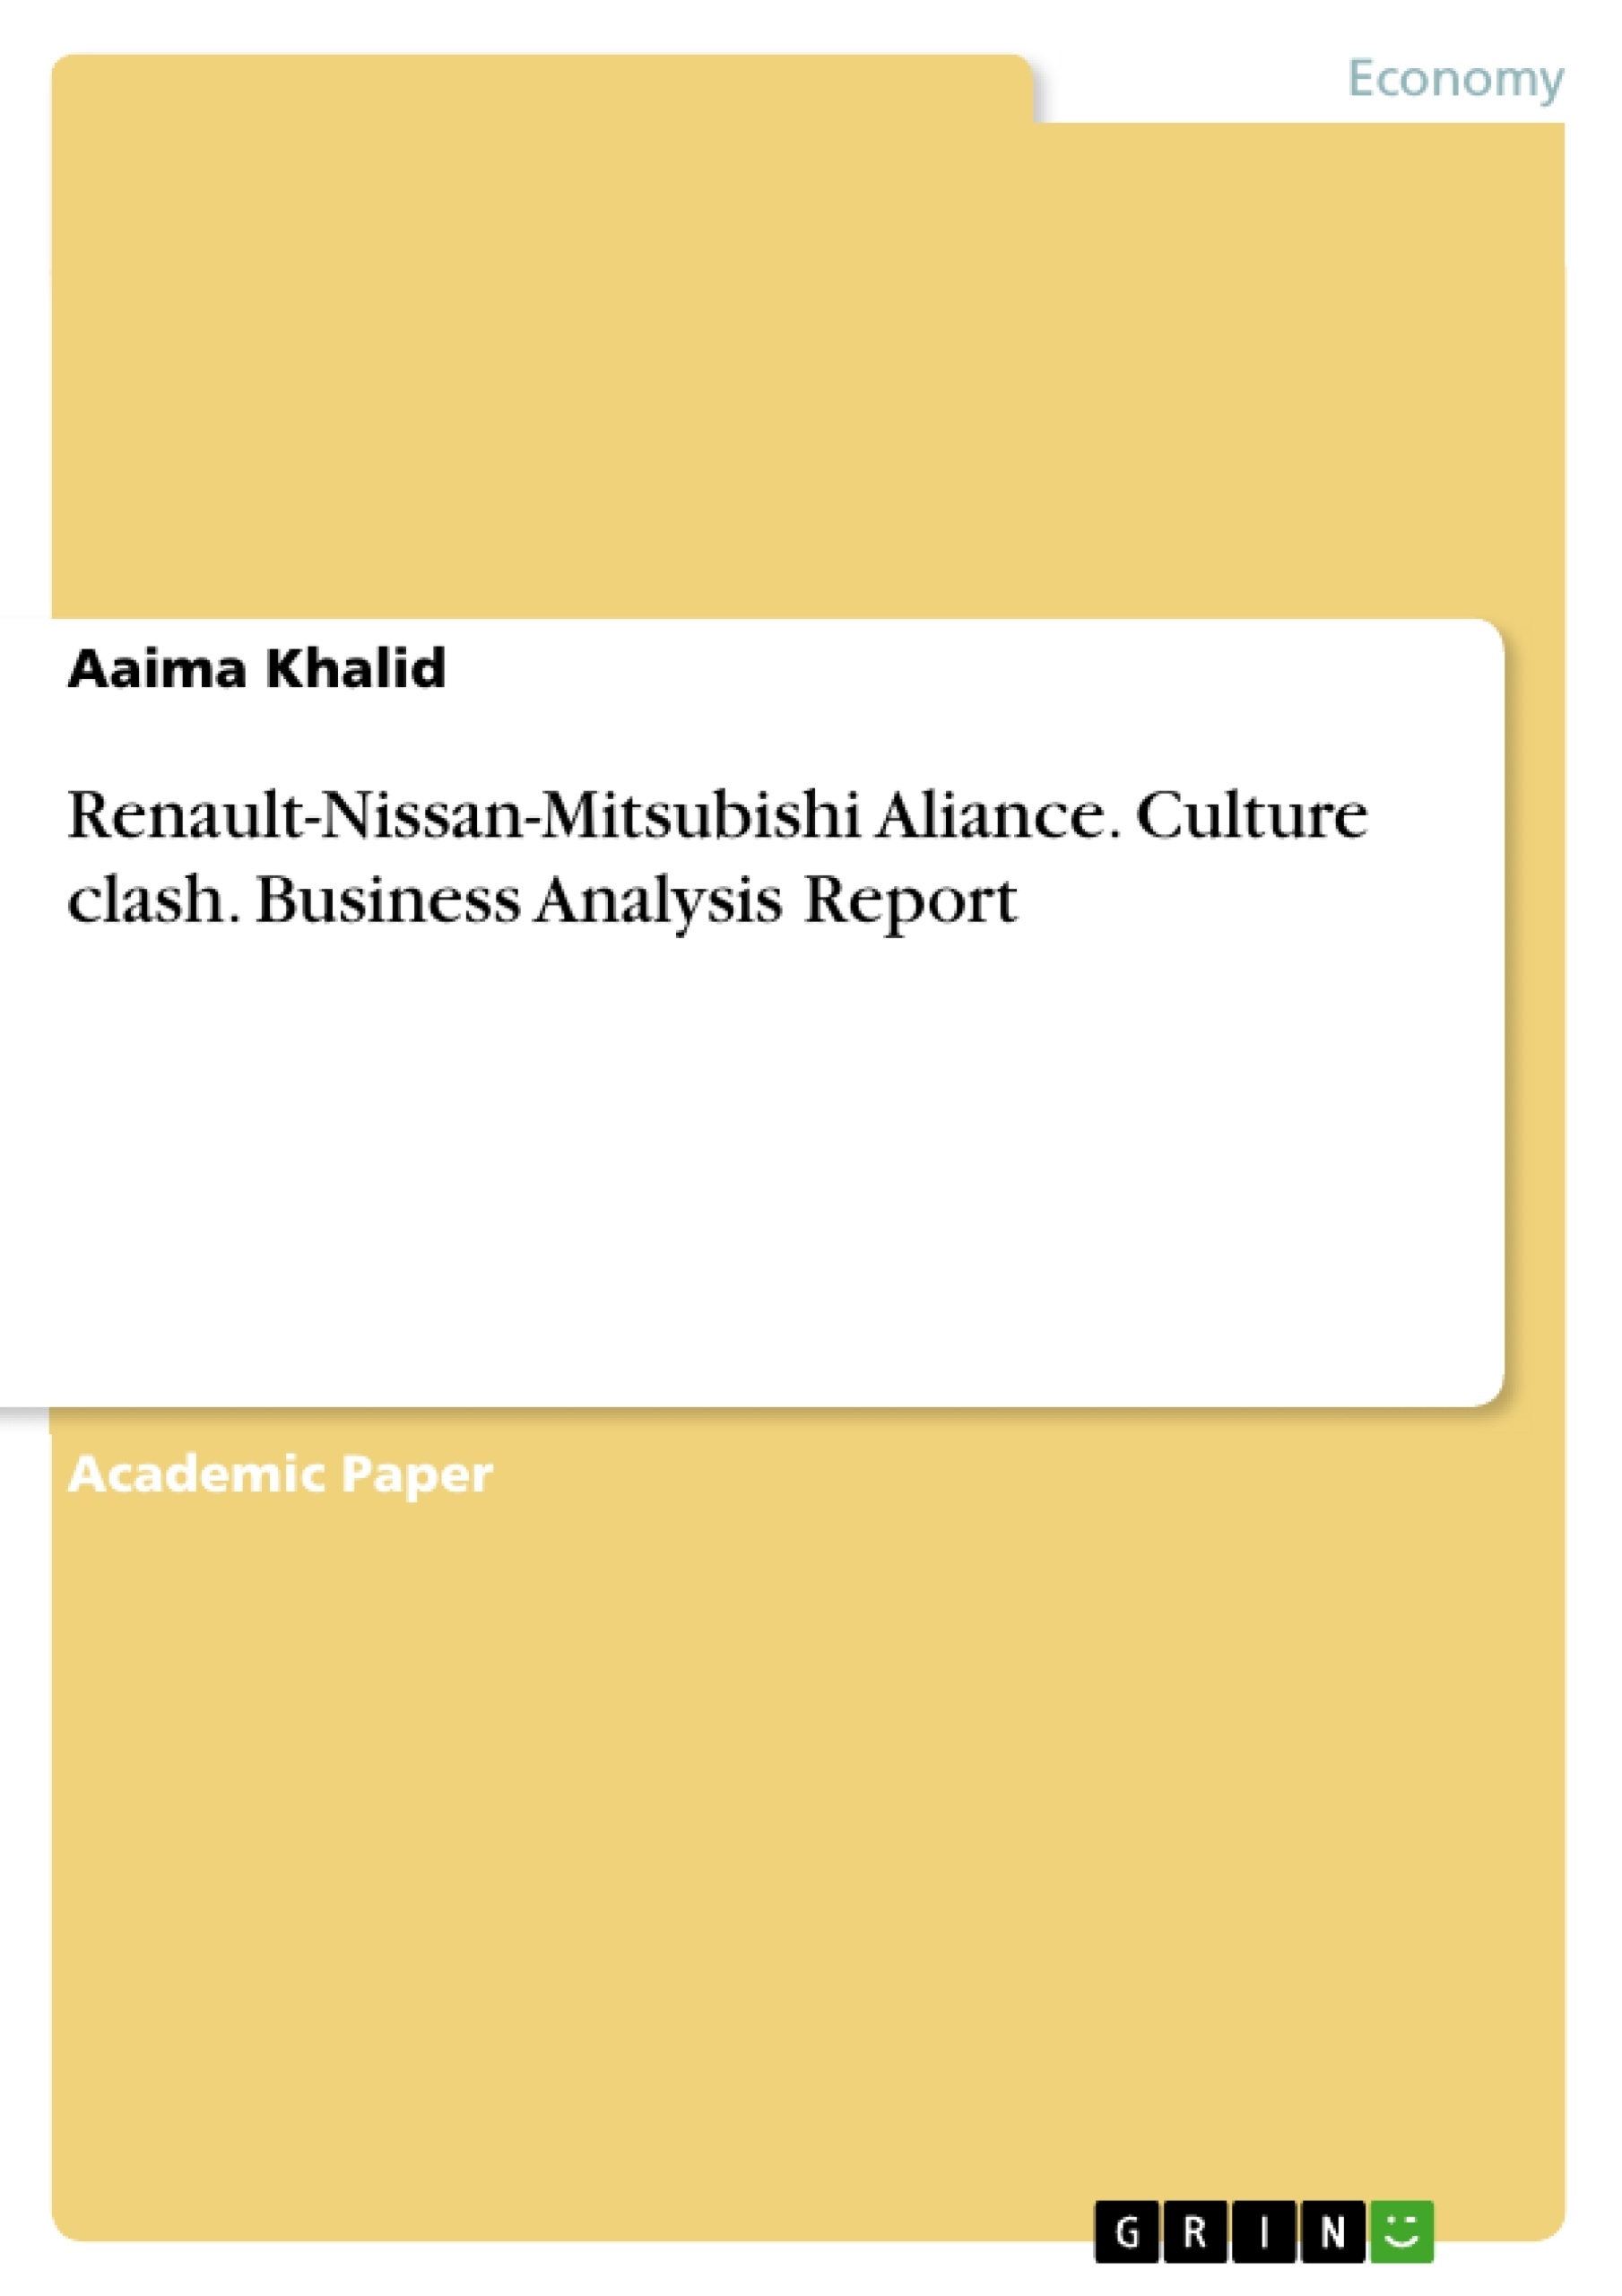 Title: Renault-Nissan-Mitsubishi Aliance. Culture clash. Business Analysis Report